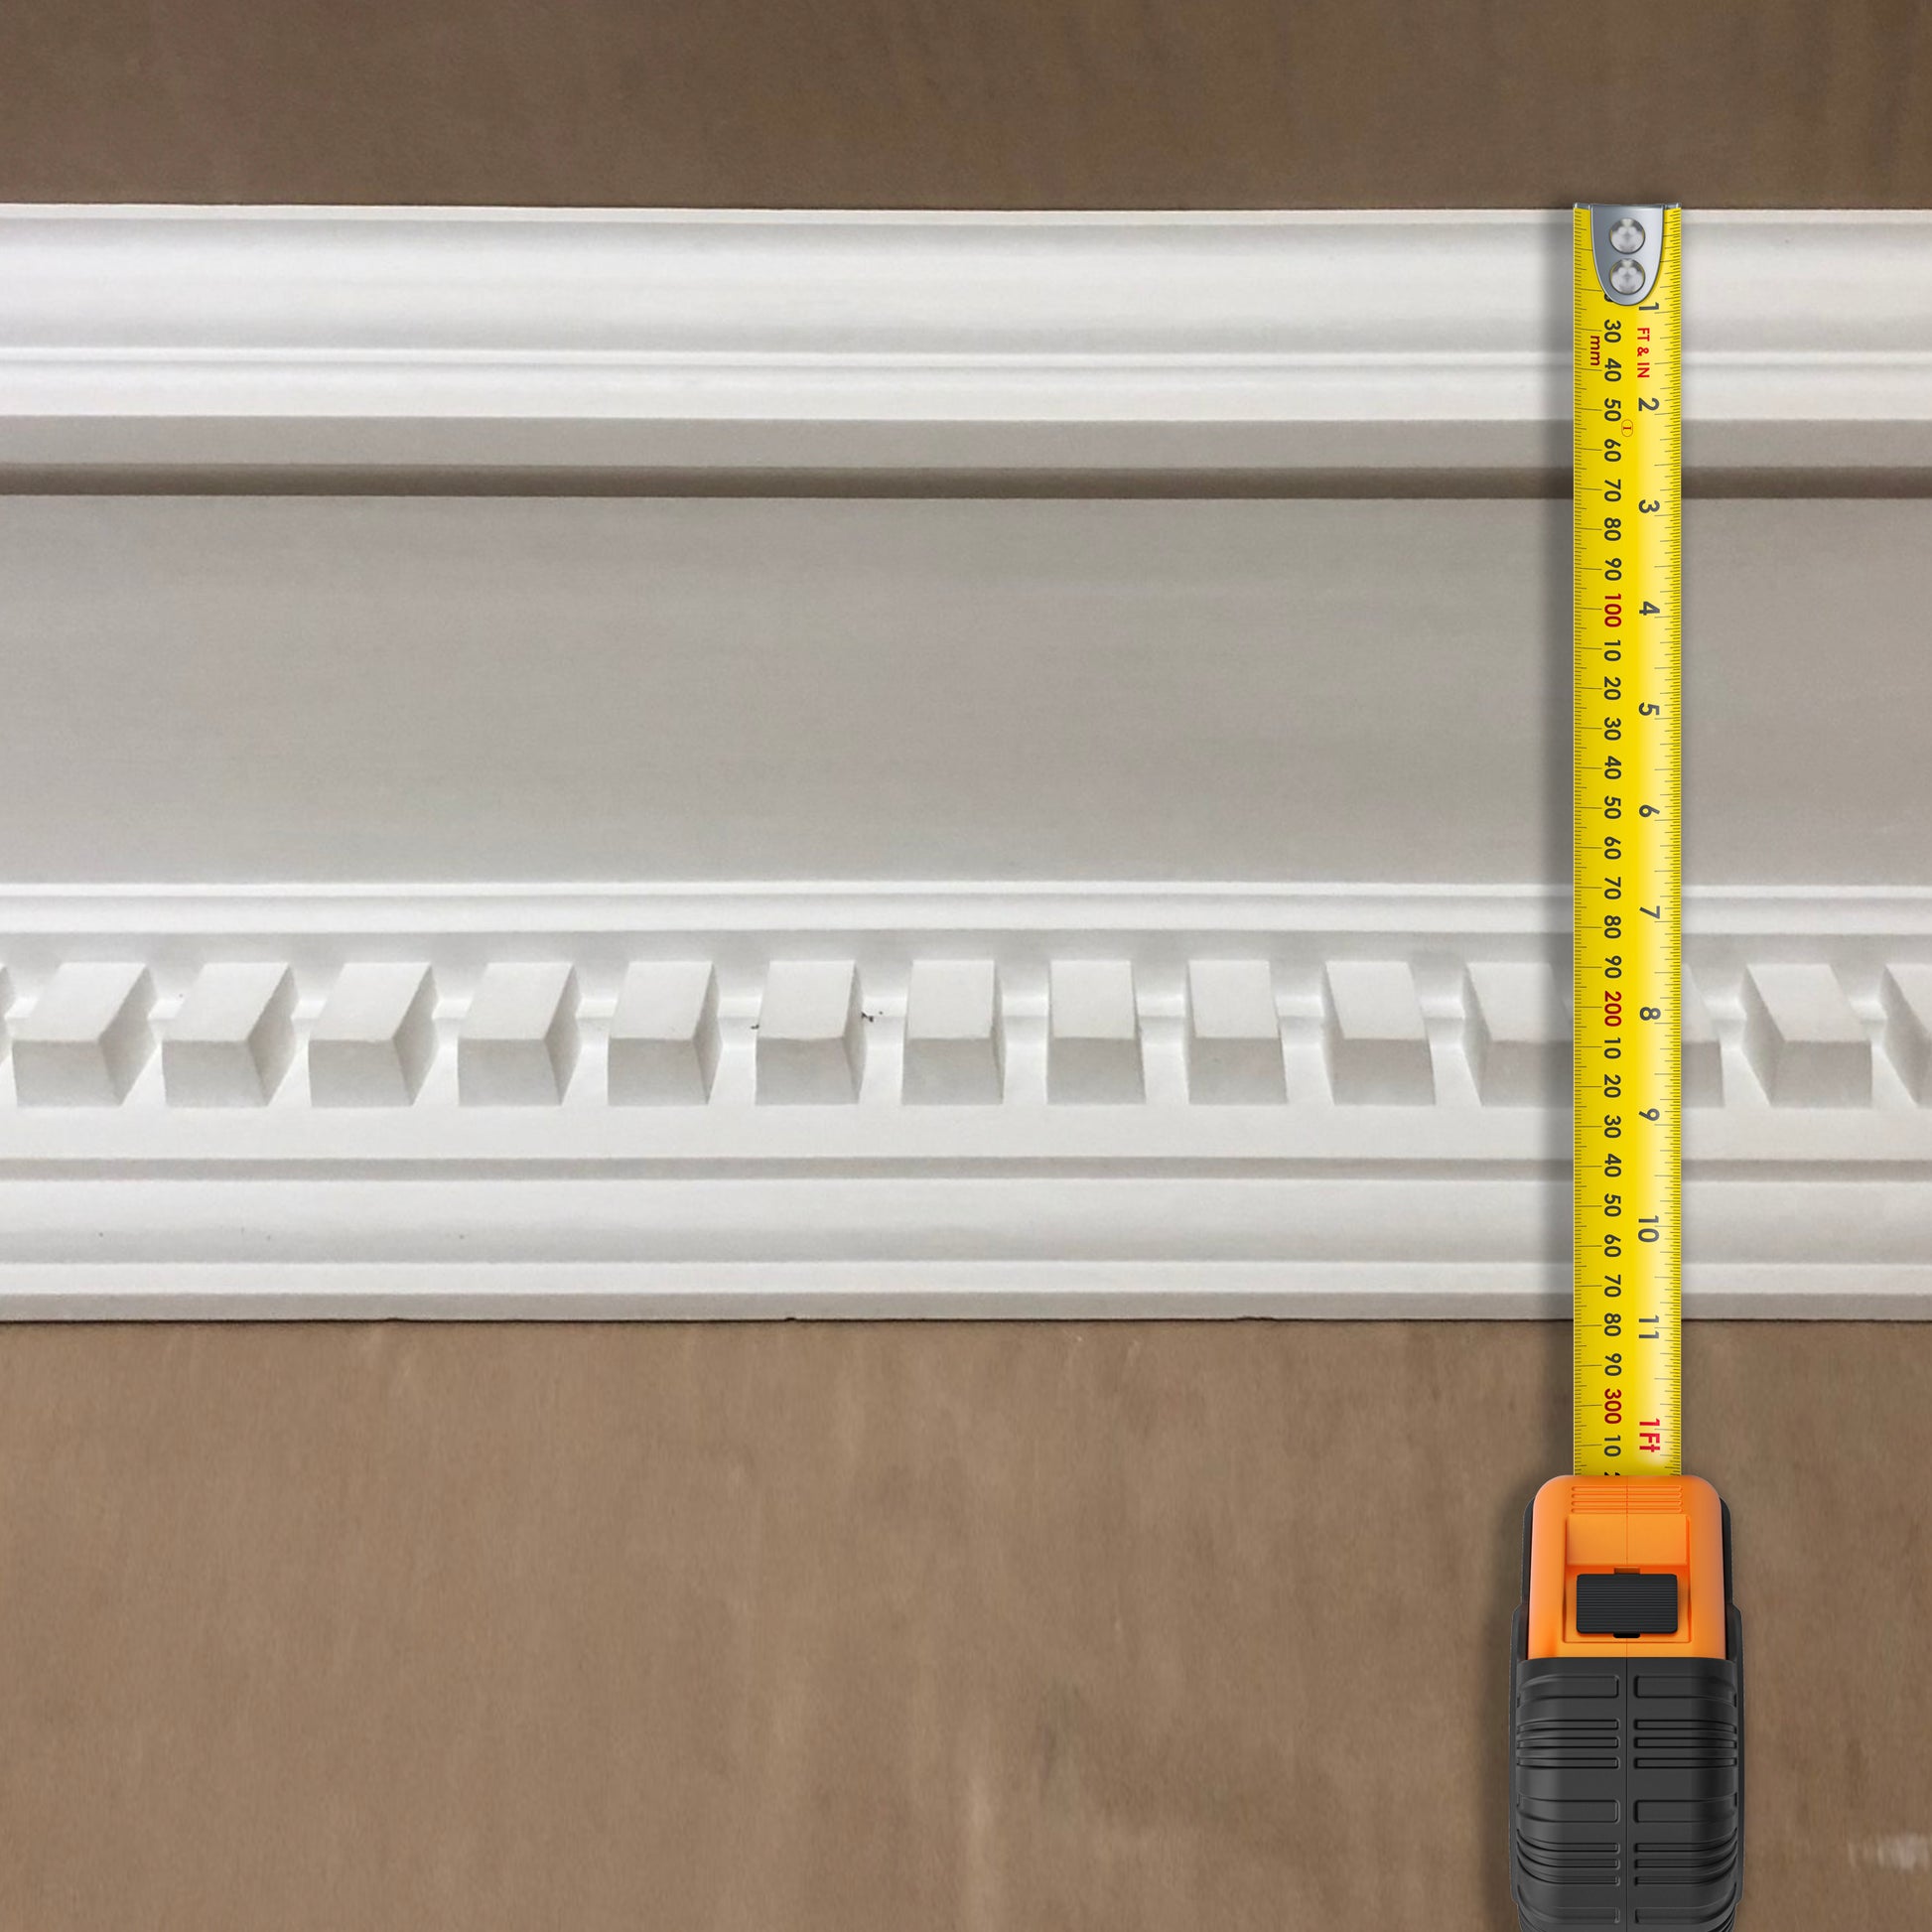 Large Dental Plaster Cornice shown with ruler for size - Drop 165MM